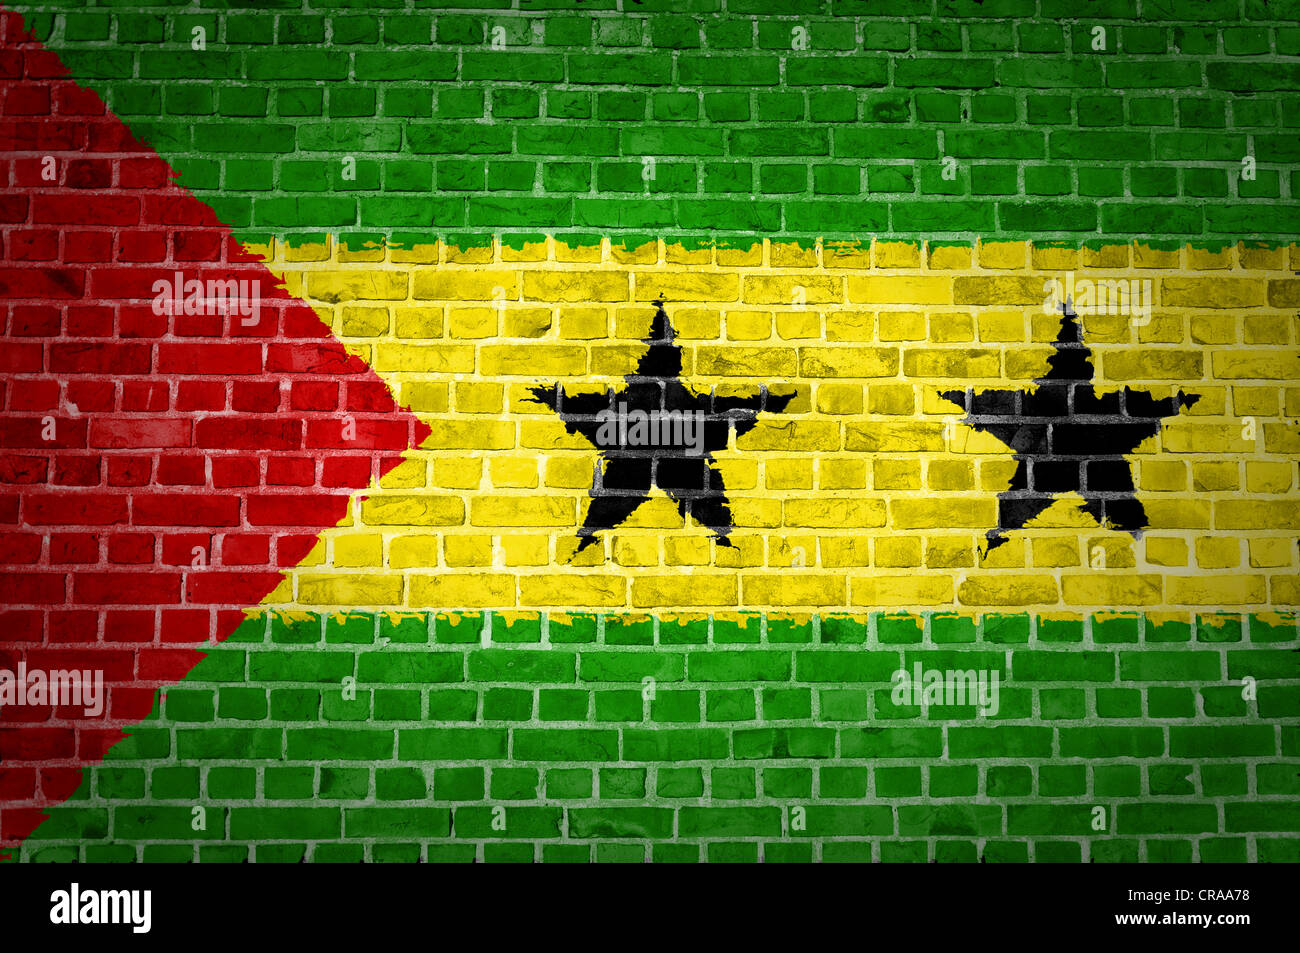 An image of the Sao Tome and Principe flag painted on a brick wall in an urban location Stock Photo